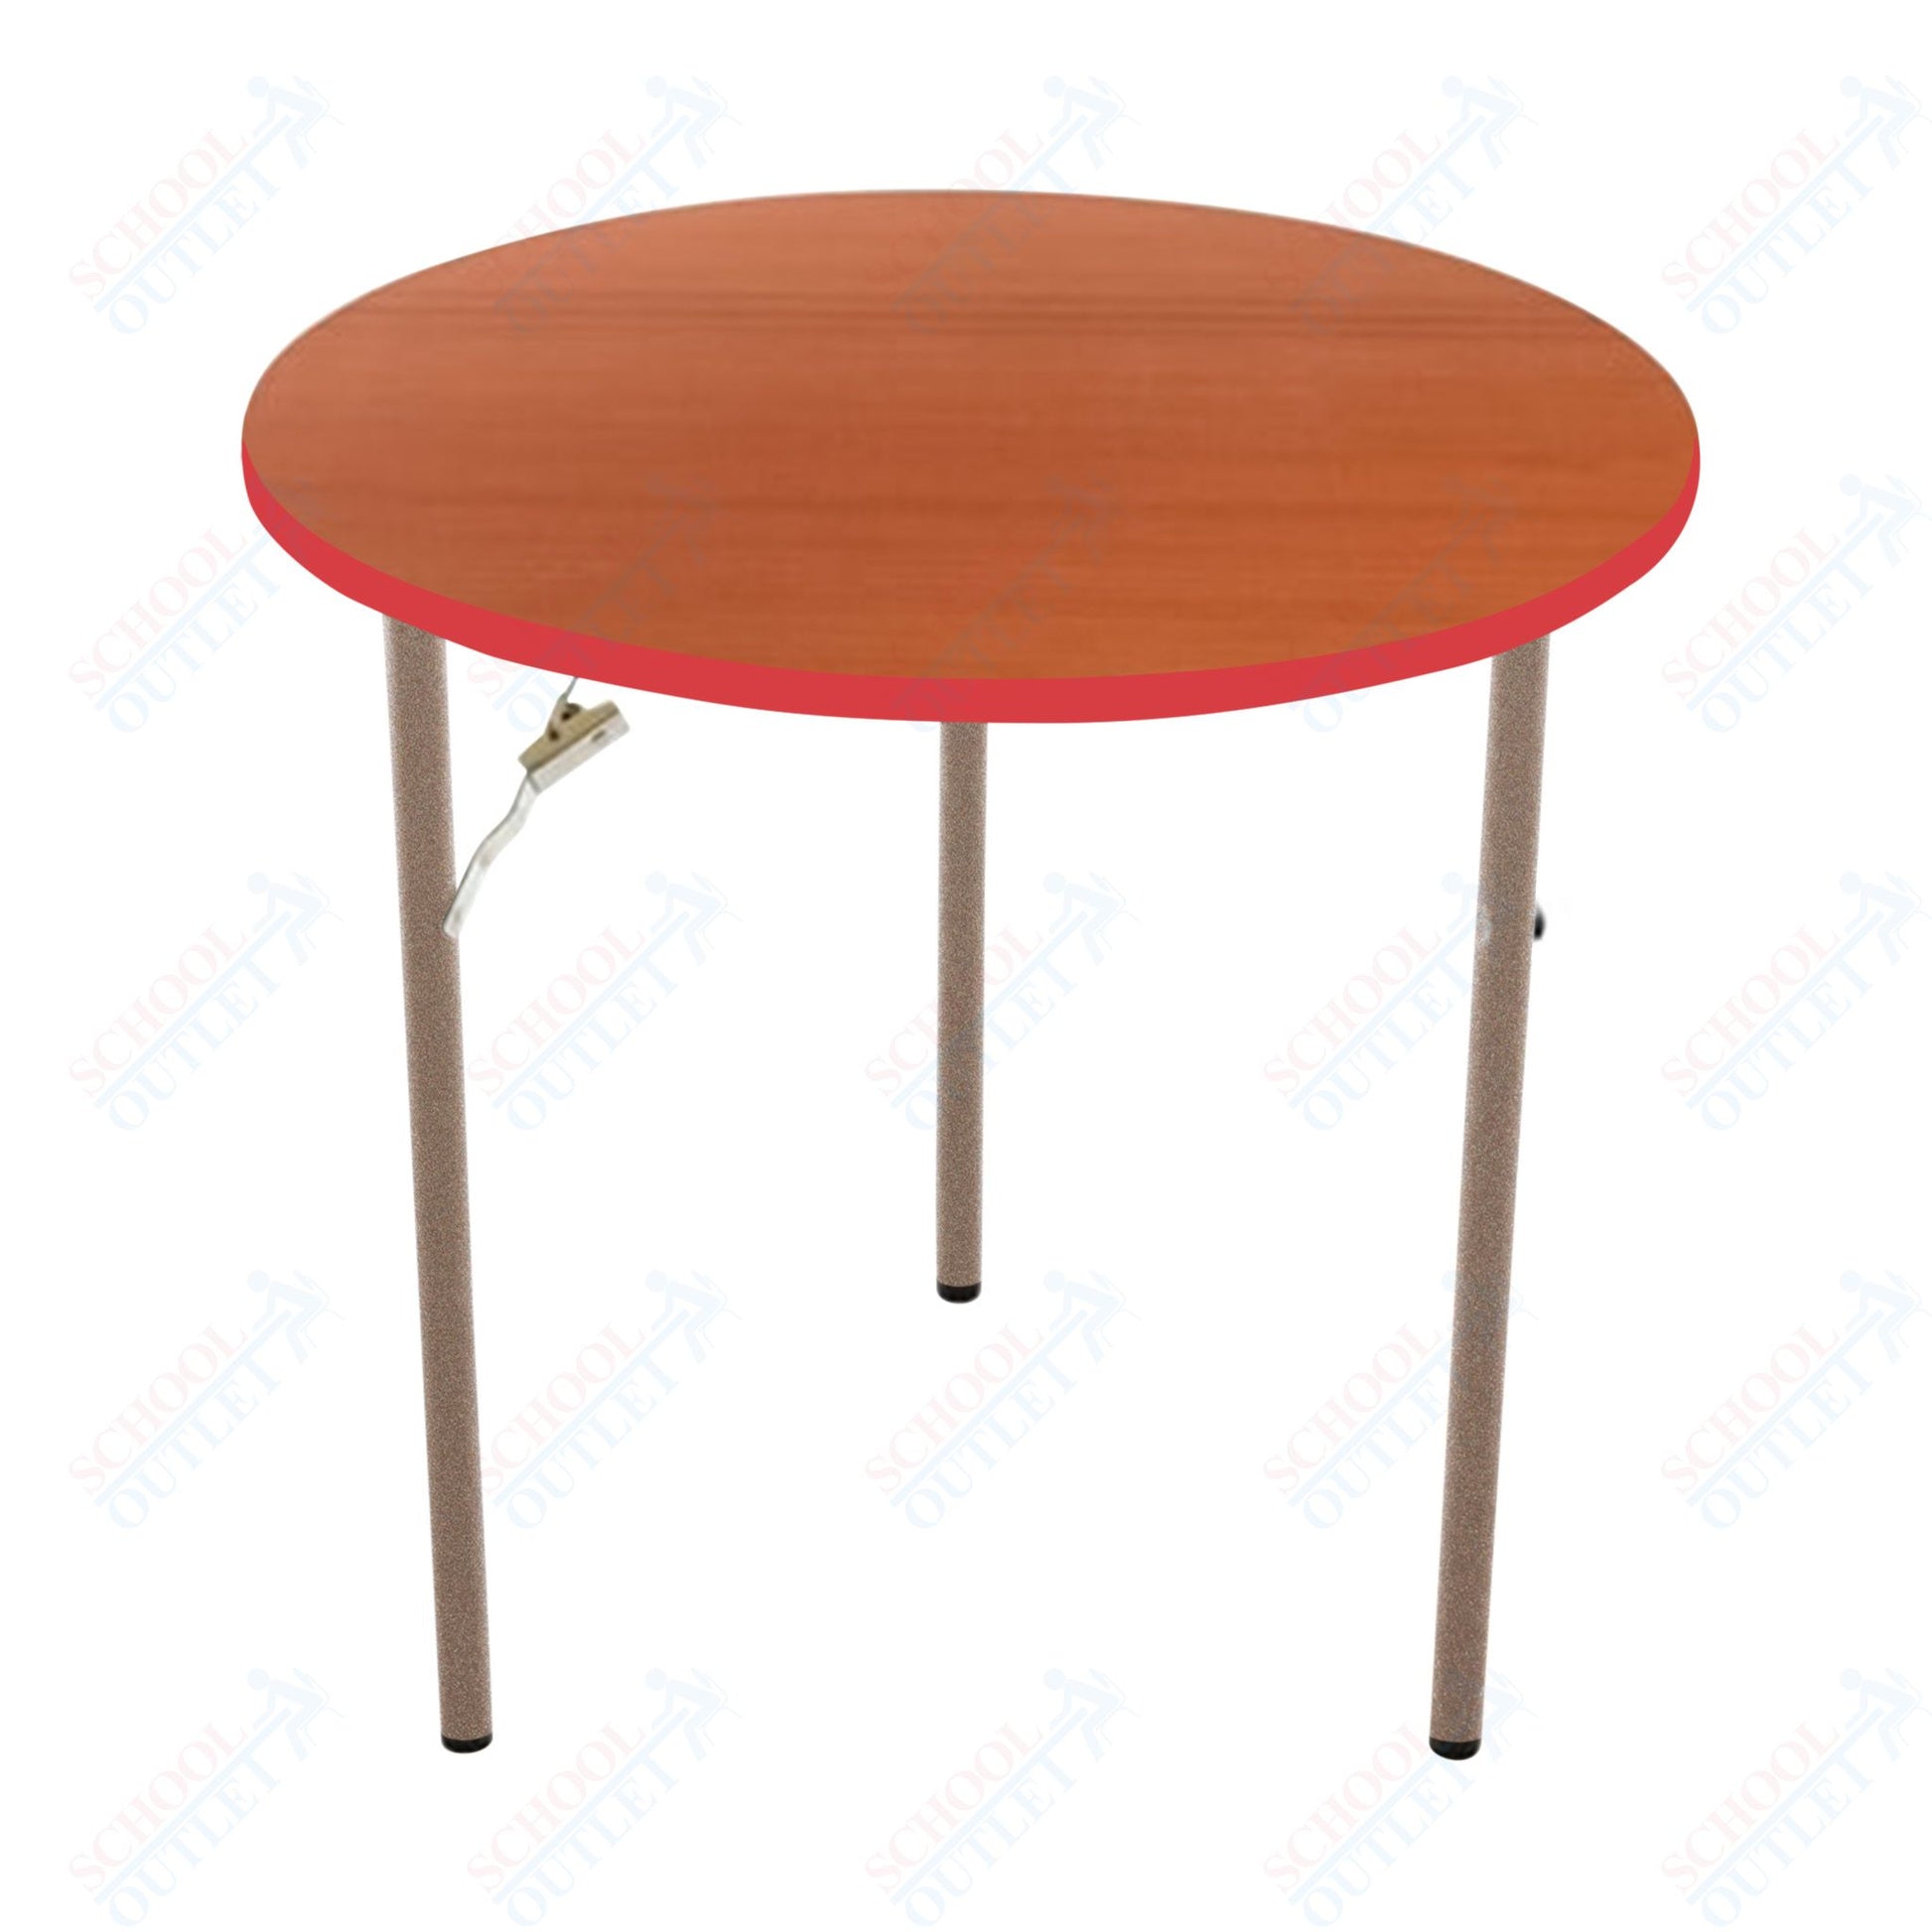 AmTab Folding Table - Plywood Stained and Sealed - Vinyl T - Molding Edge - Round - 72" Diameter x 29"H (AmTab AMT - R72PM) - SchoolOutlet